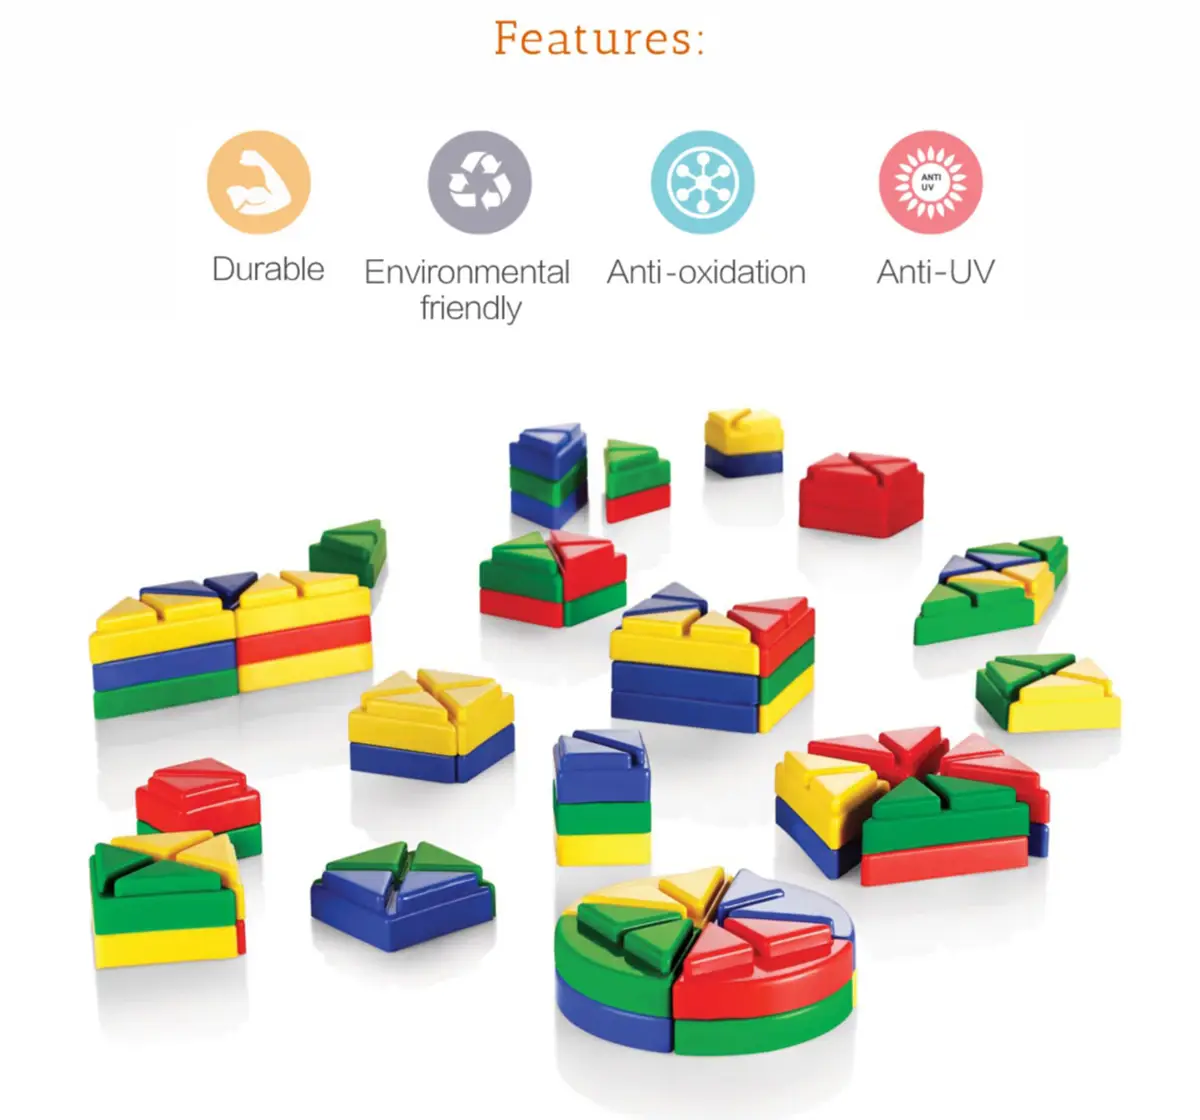 Ok Play Creat a Shape Interlocking blocks Early Learning Educational Toy for Kids Multicolor 3Y+